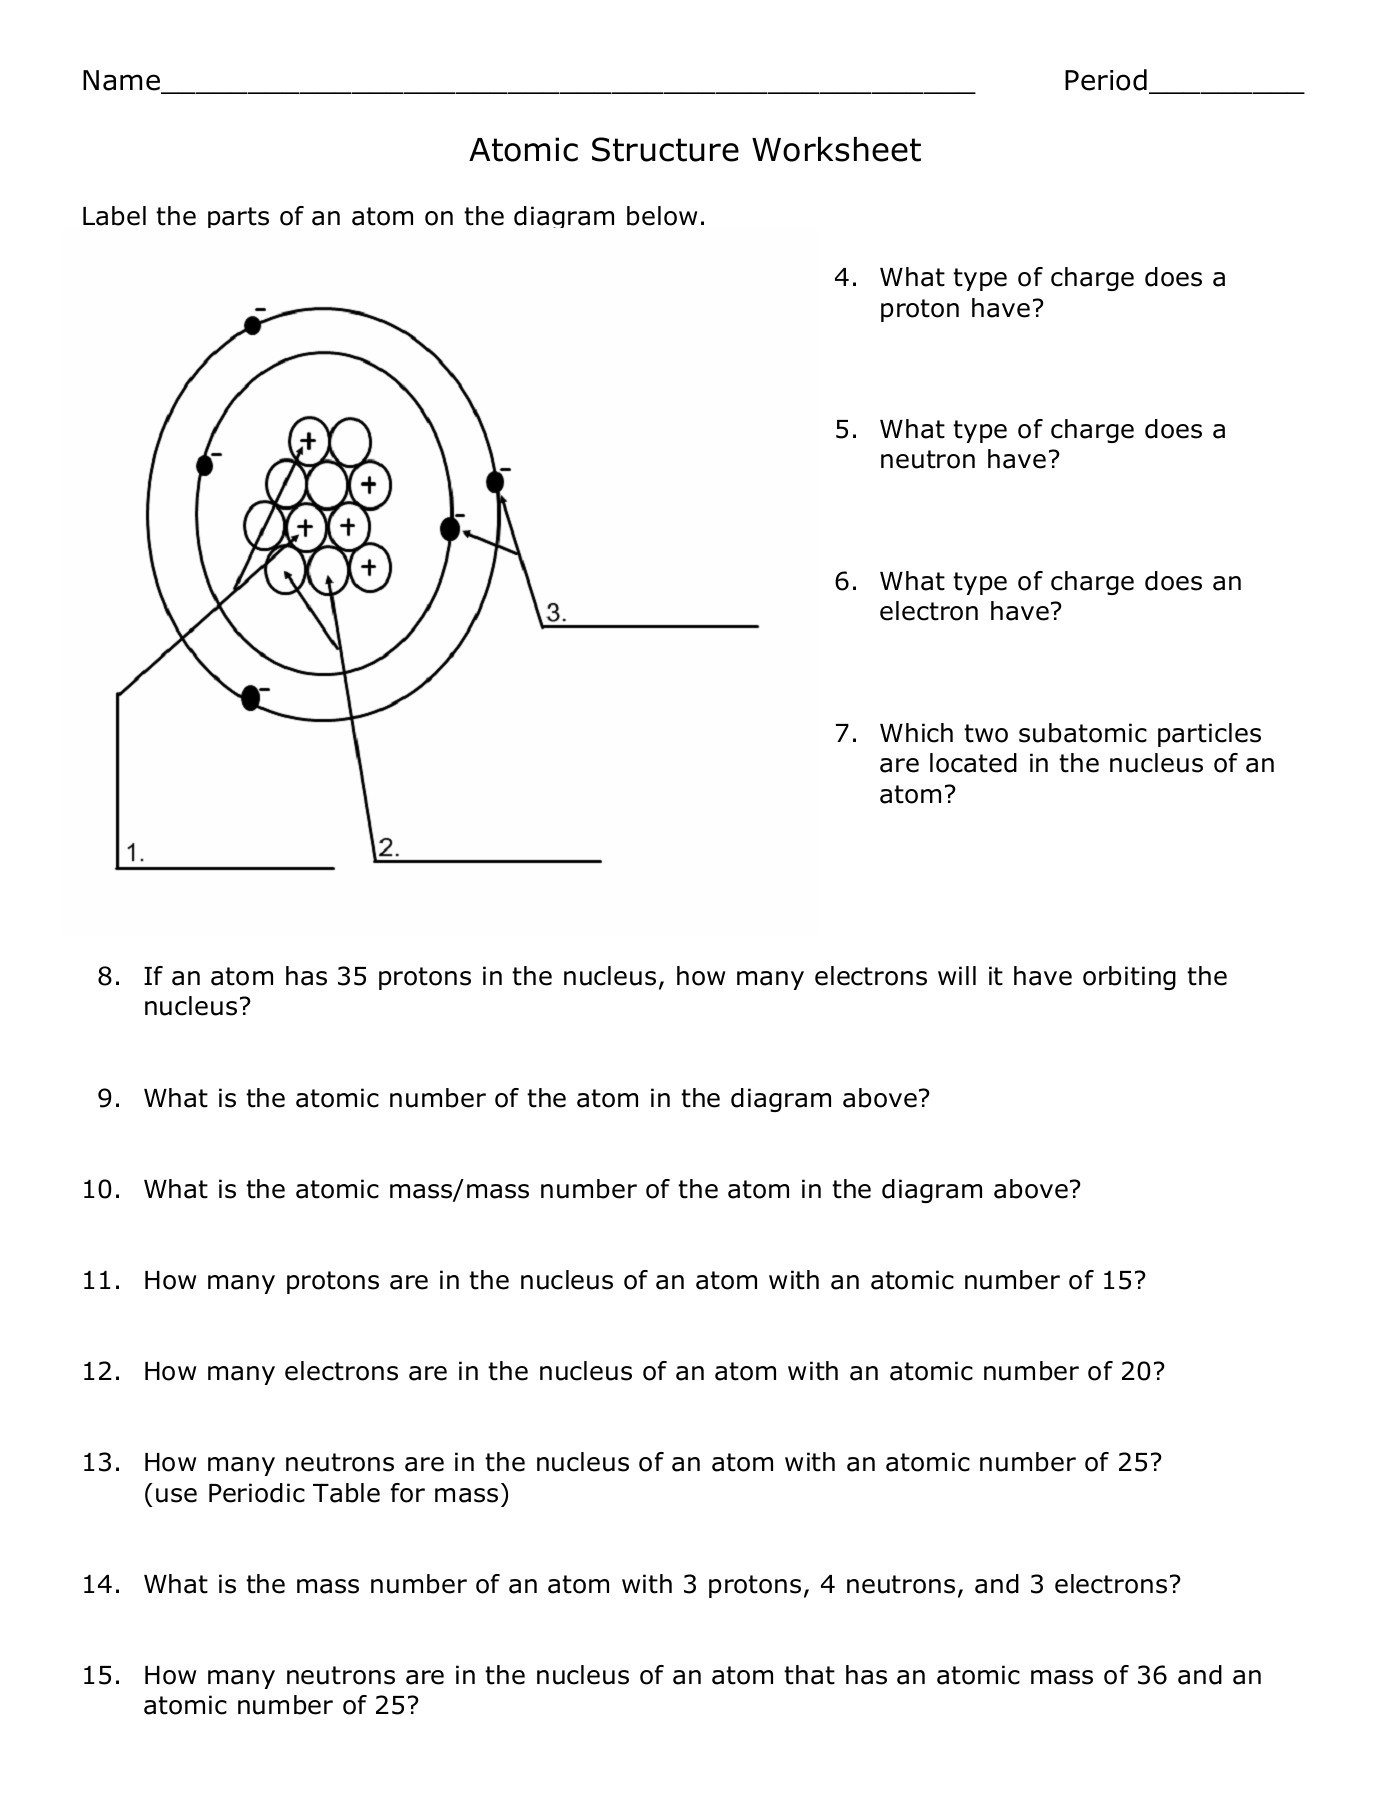 Bohr Model Worksheet Answers atomic Structure Worksheet Shelby County Schools Pages 1